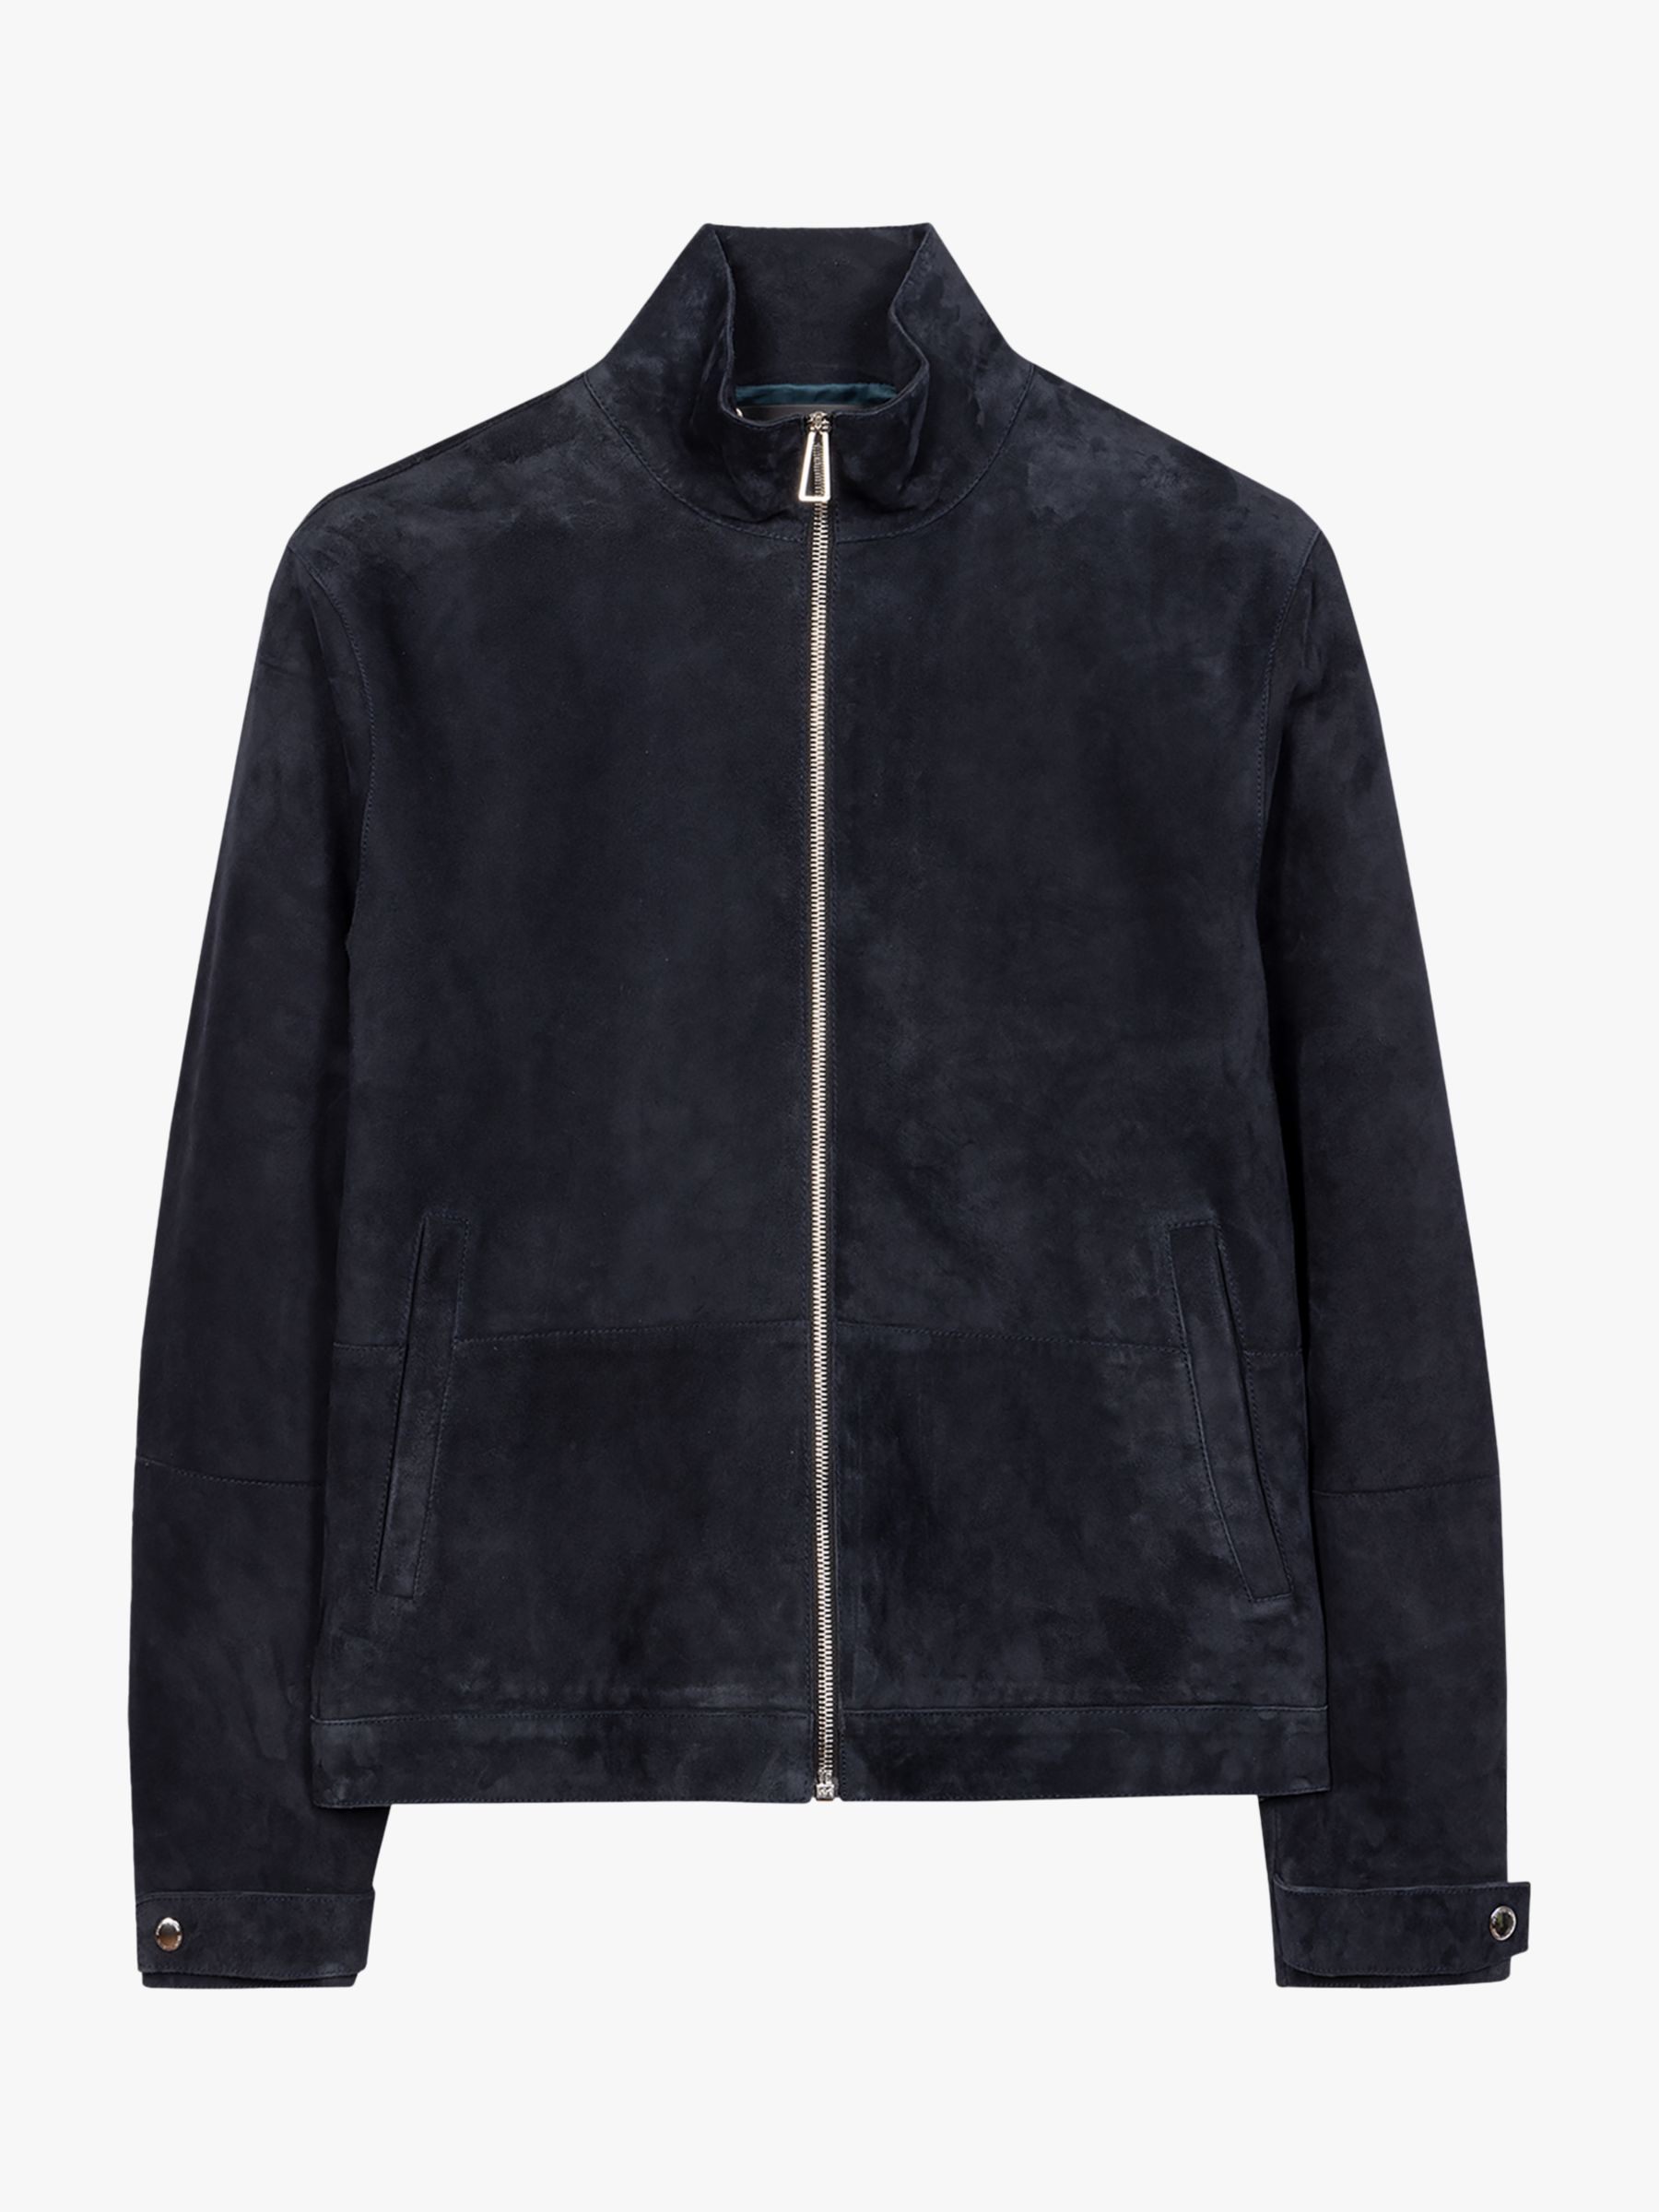 Paul Smith Suede Jacket, Navy, M